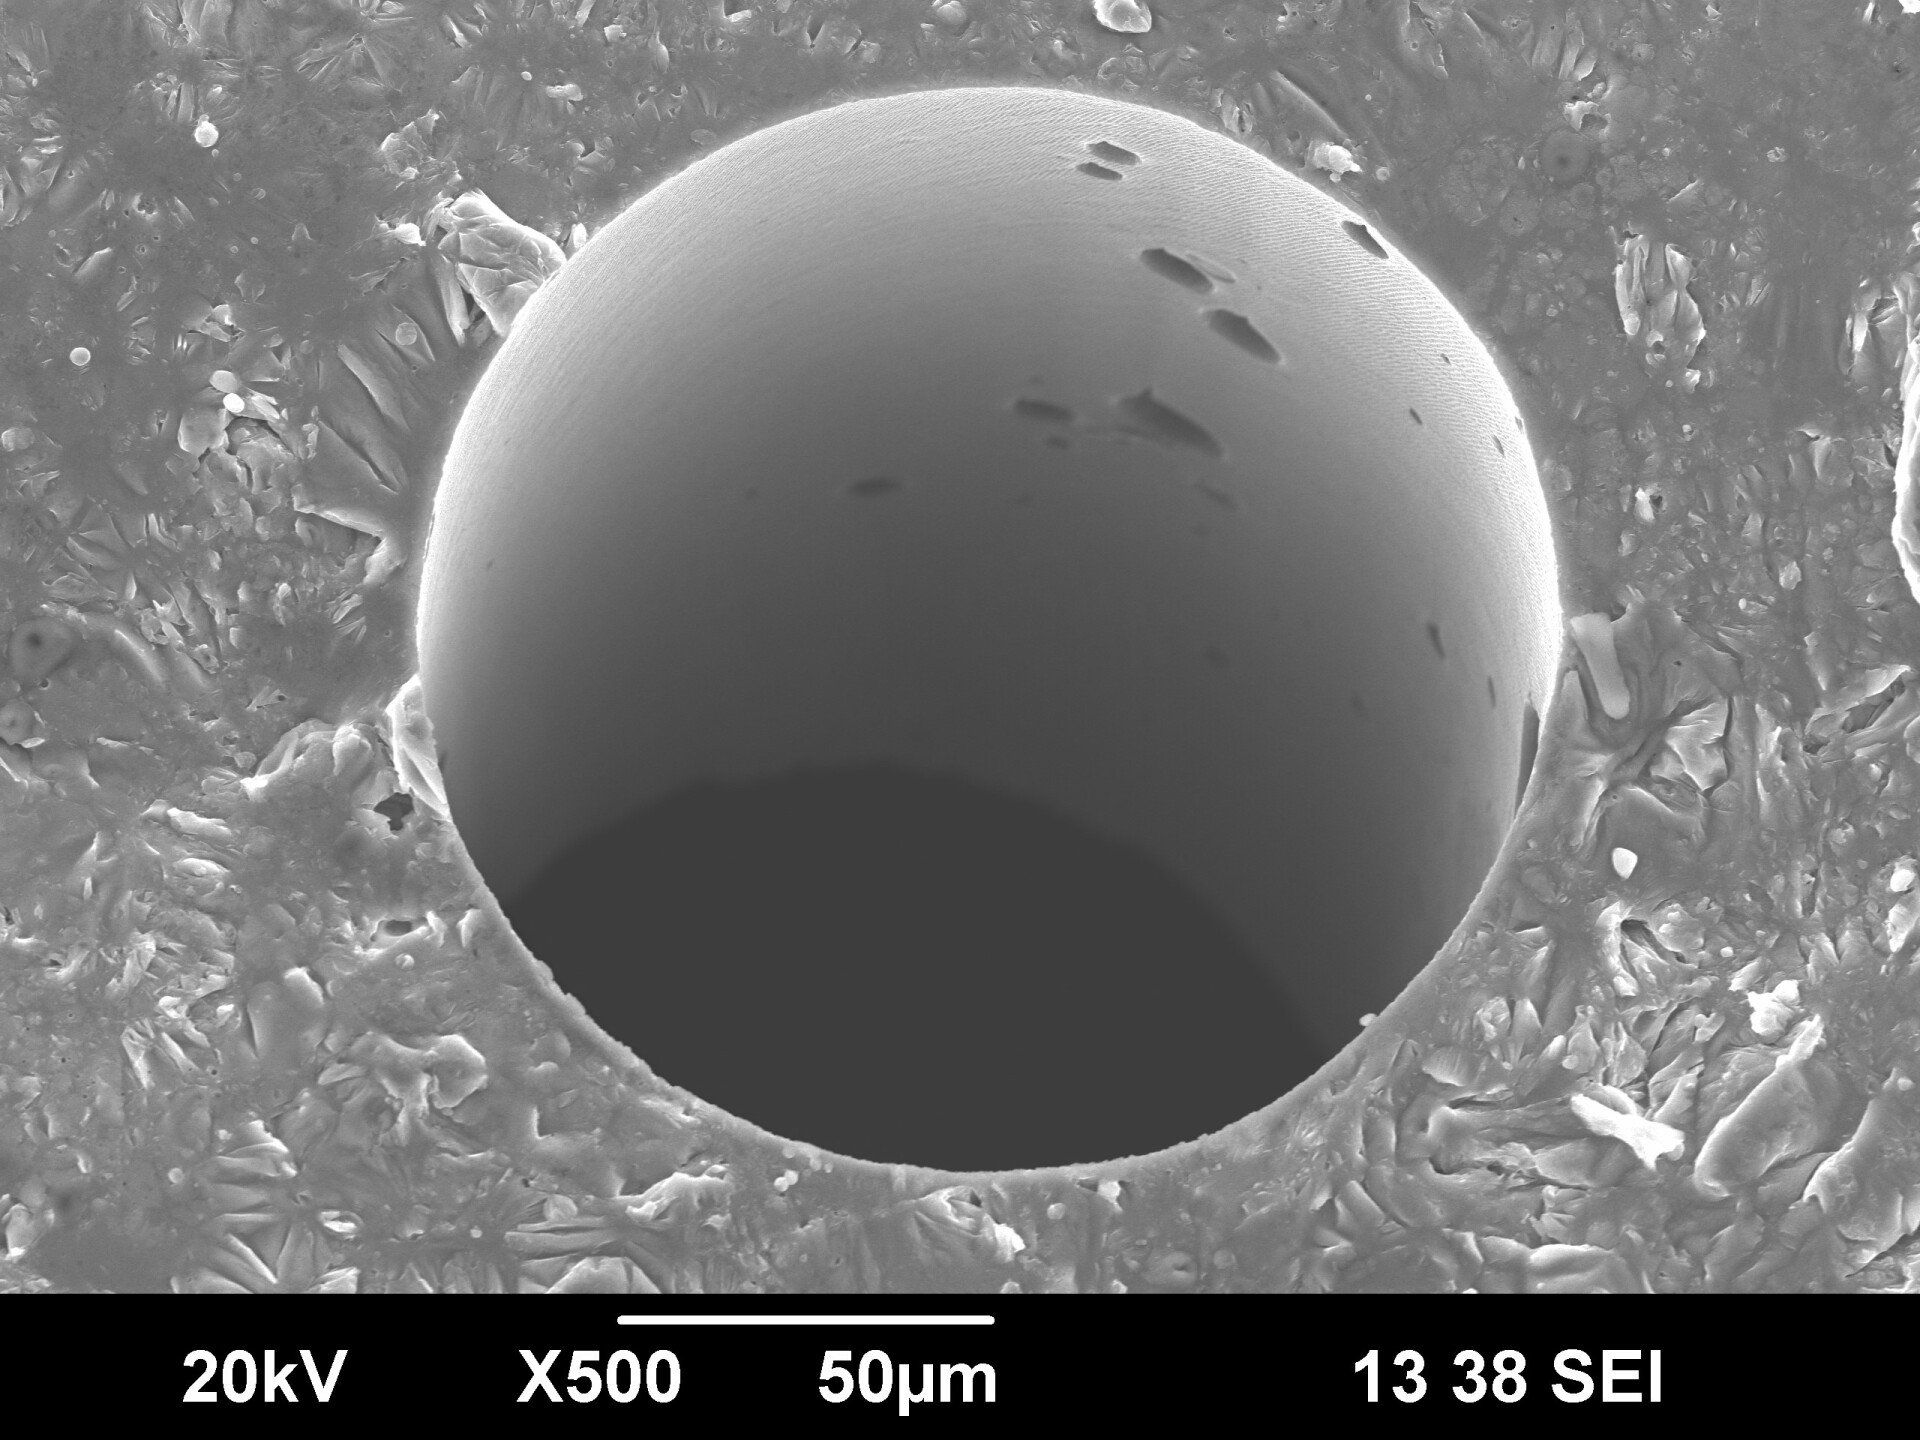 Exit of microhole in additive manufactured aluminum